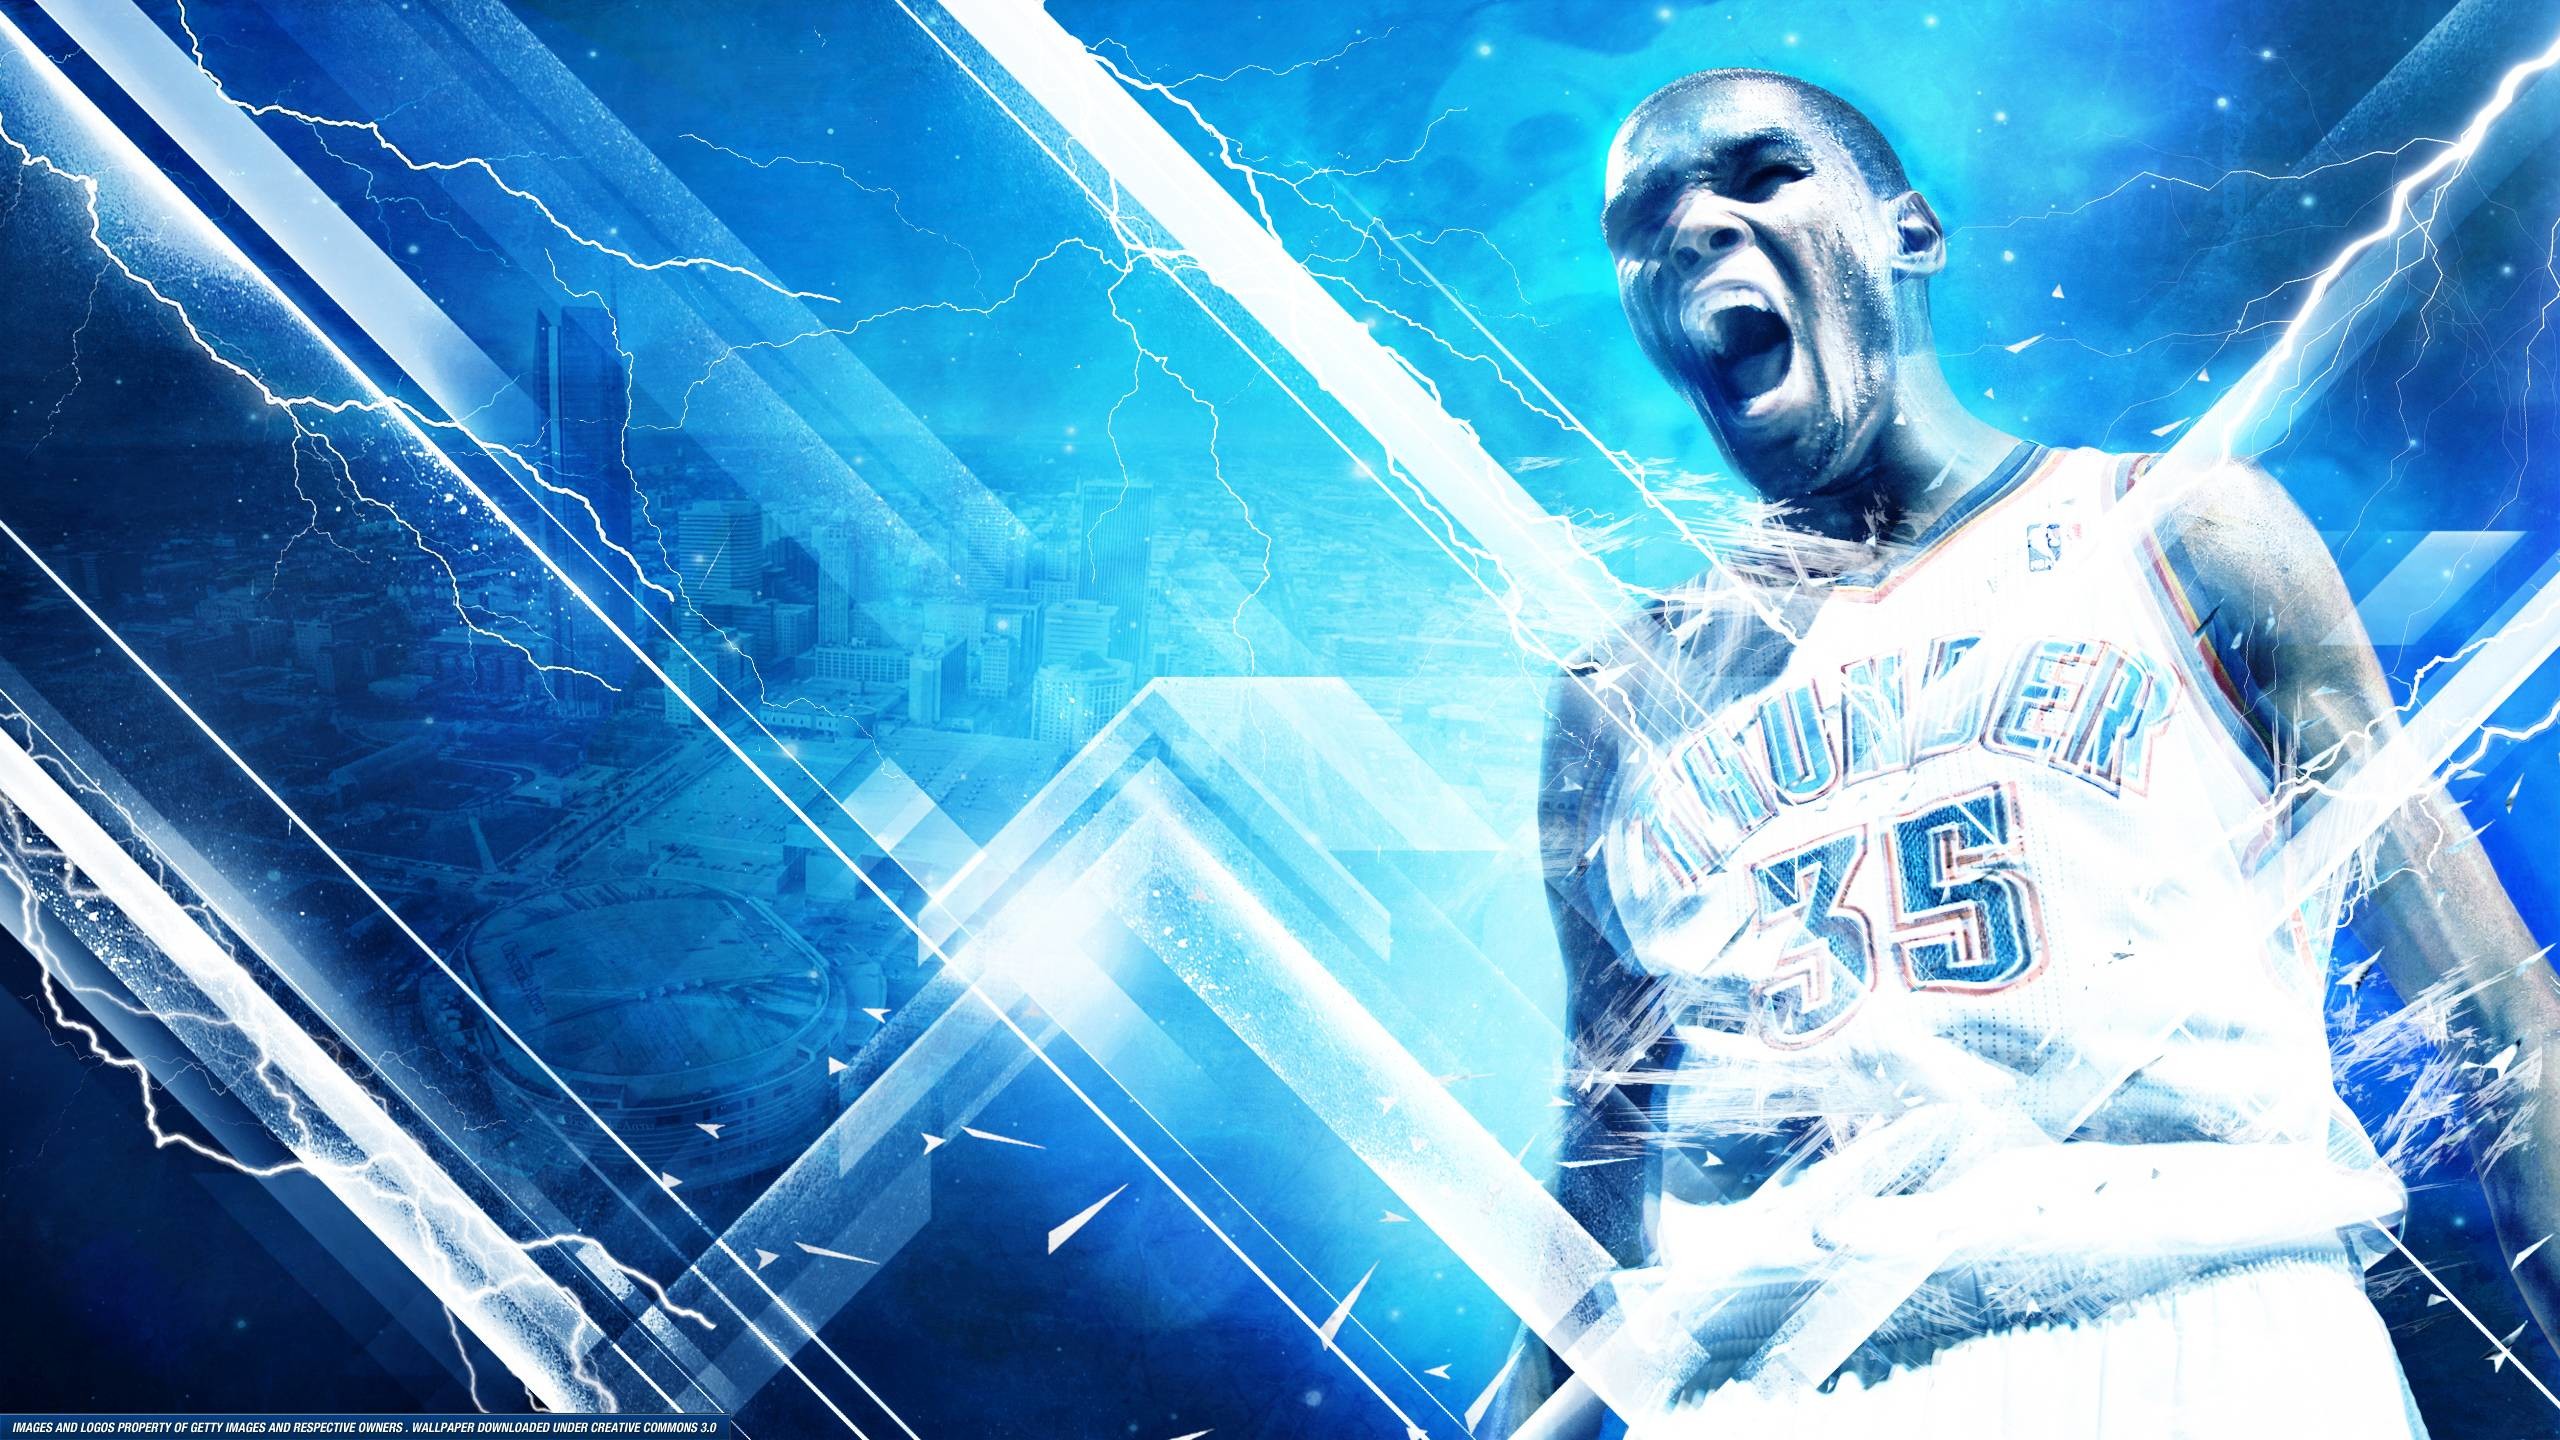 2560x1440 Kevin Durant Wallpaper iPhone | HD Wallpapers | Pinterest | Kevin durant,  Hd wallpaper and Wallpaper